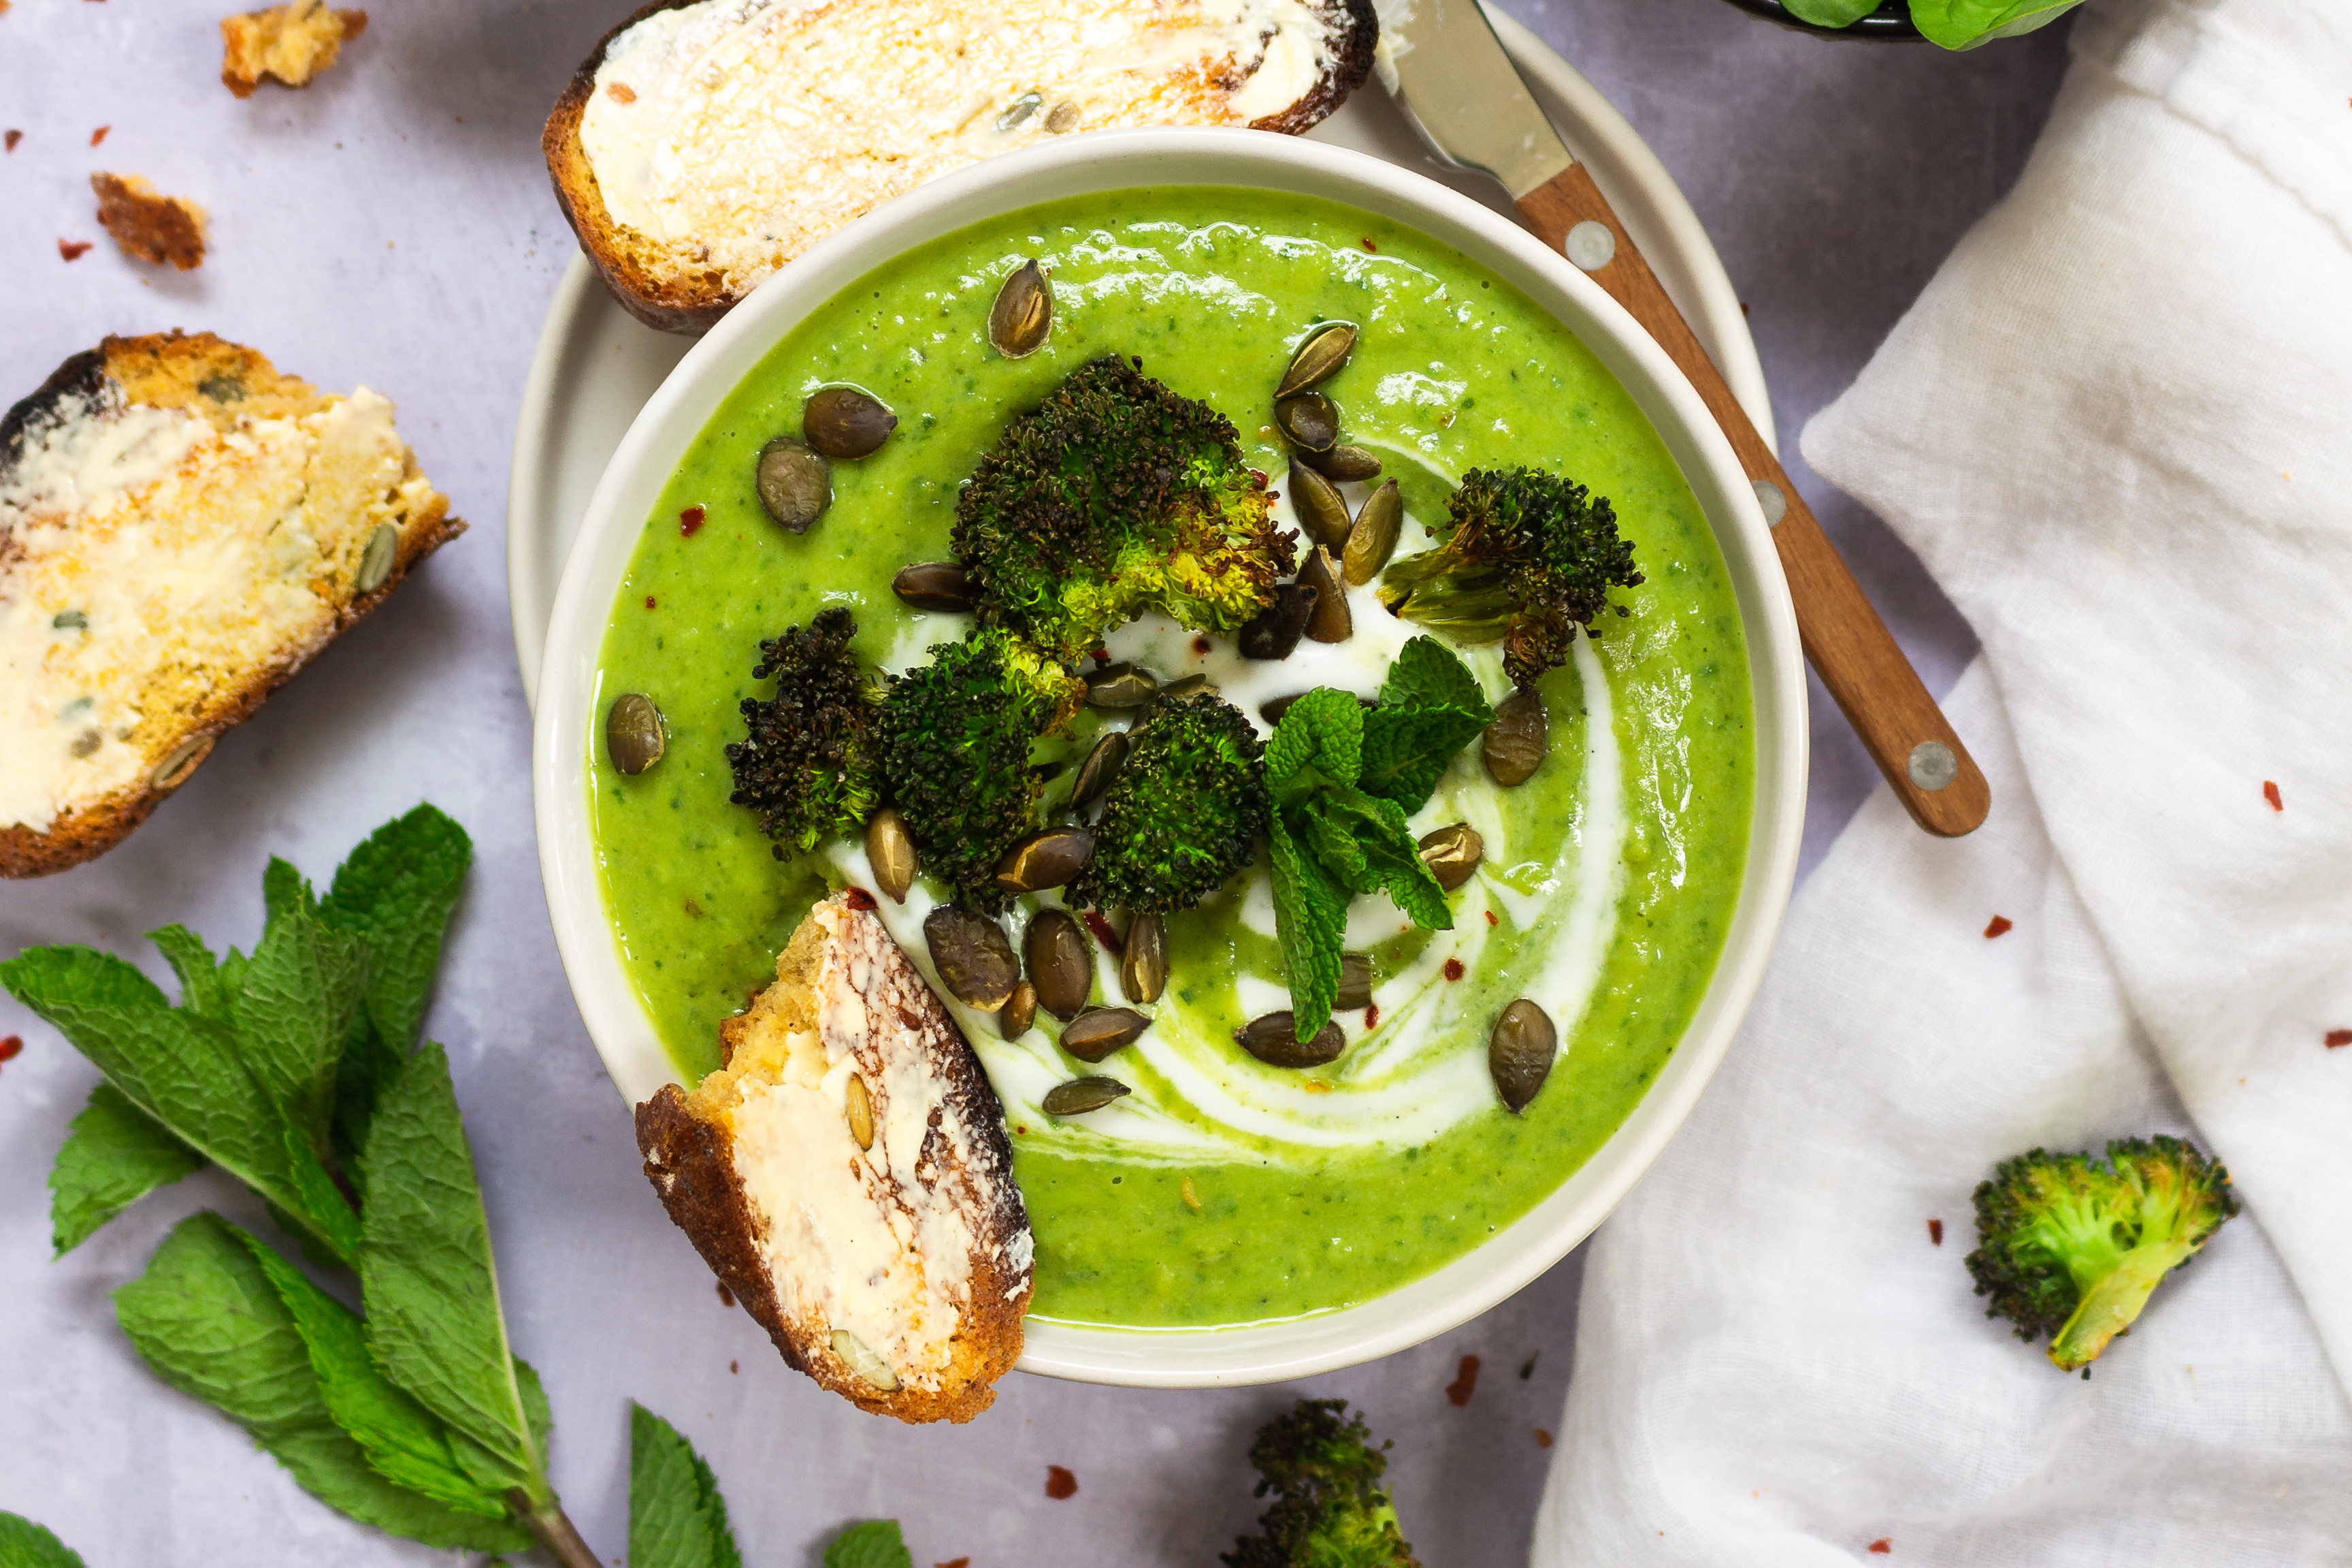 Broccoli and Pea Mint Soup with Roasted Broccoli Croutons